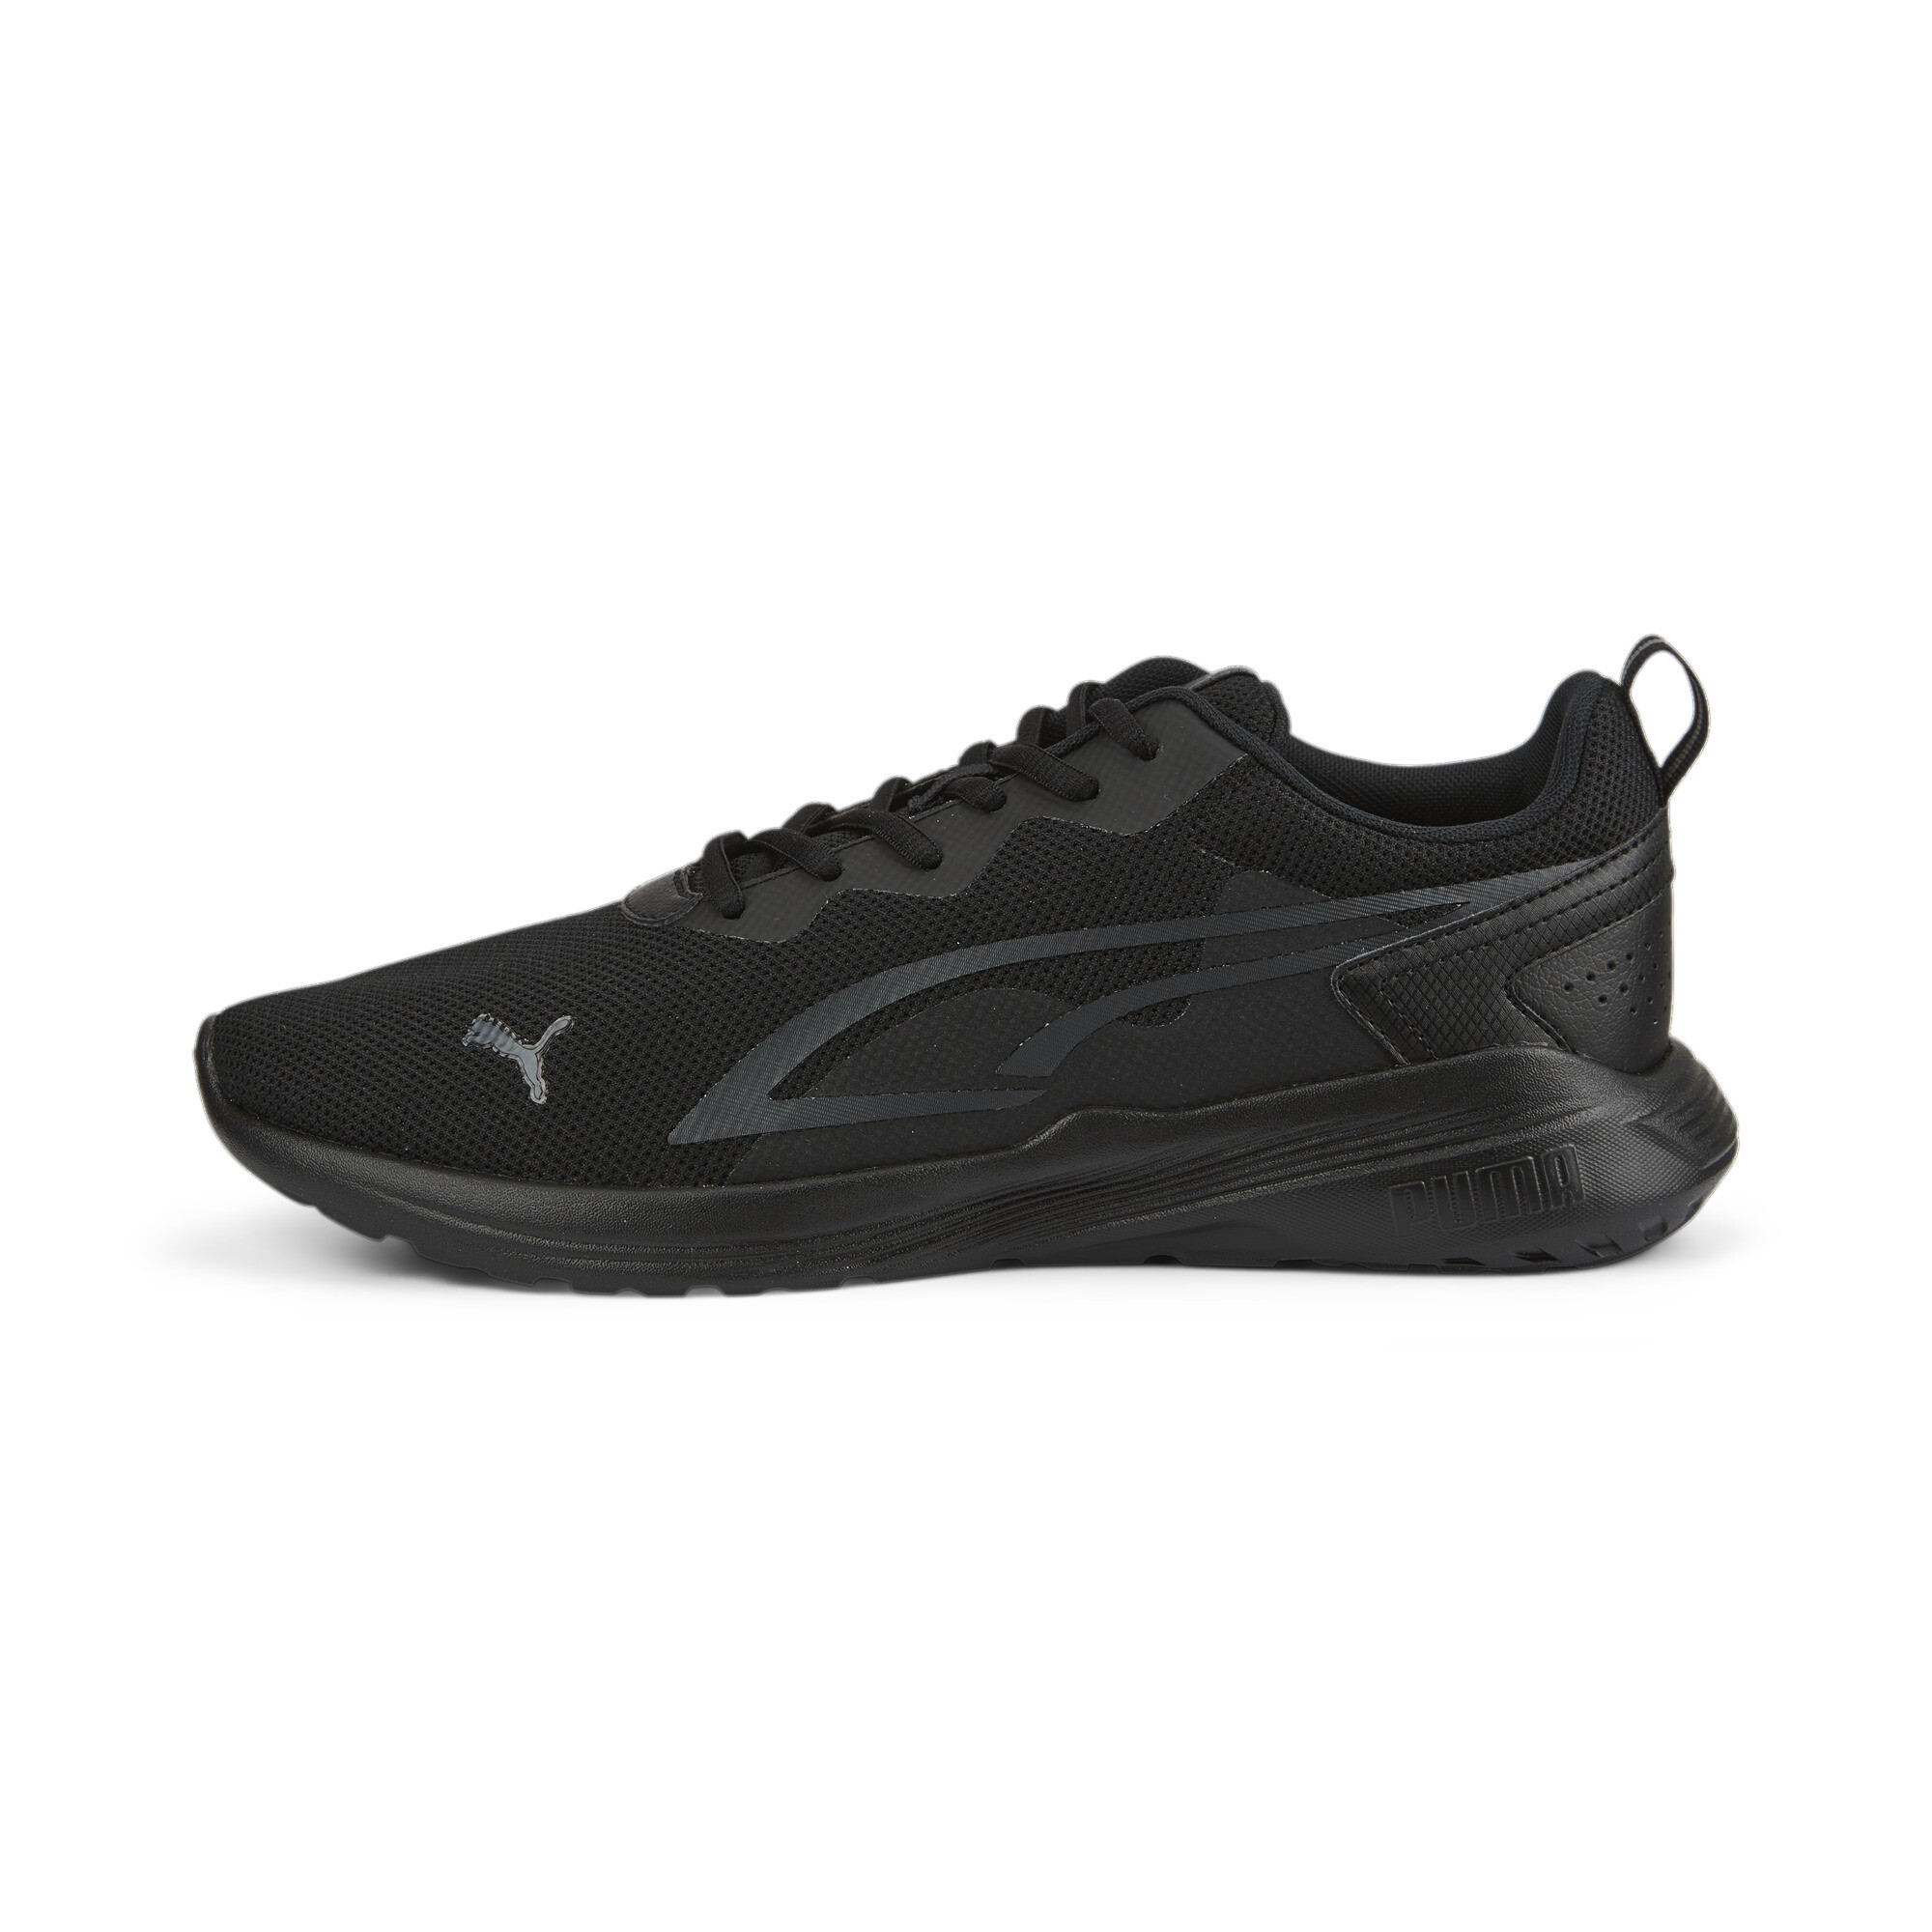 Men's Puma All Day Active Sneakers, Black, Size 39, Shoes